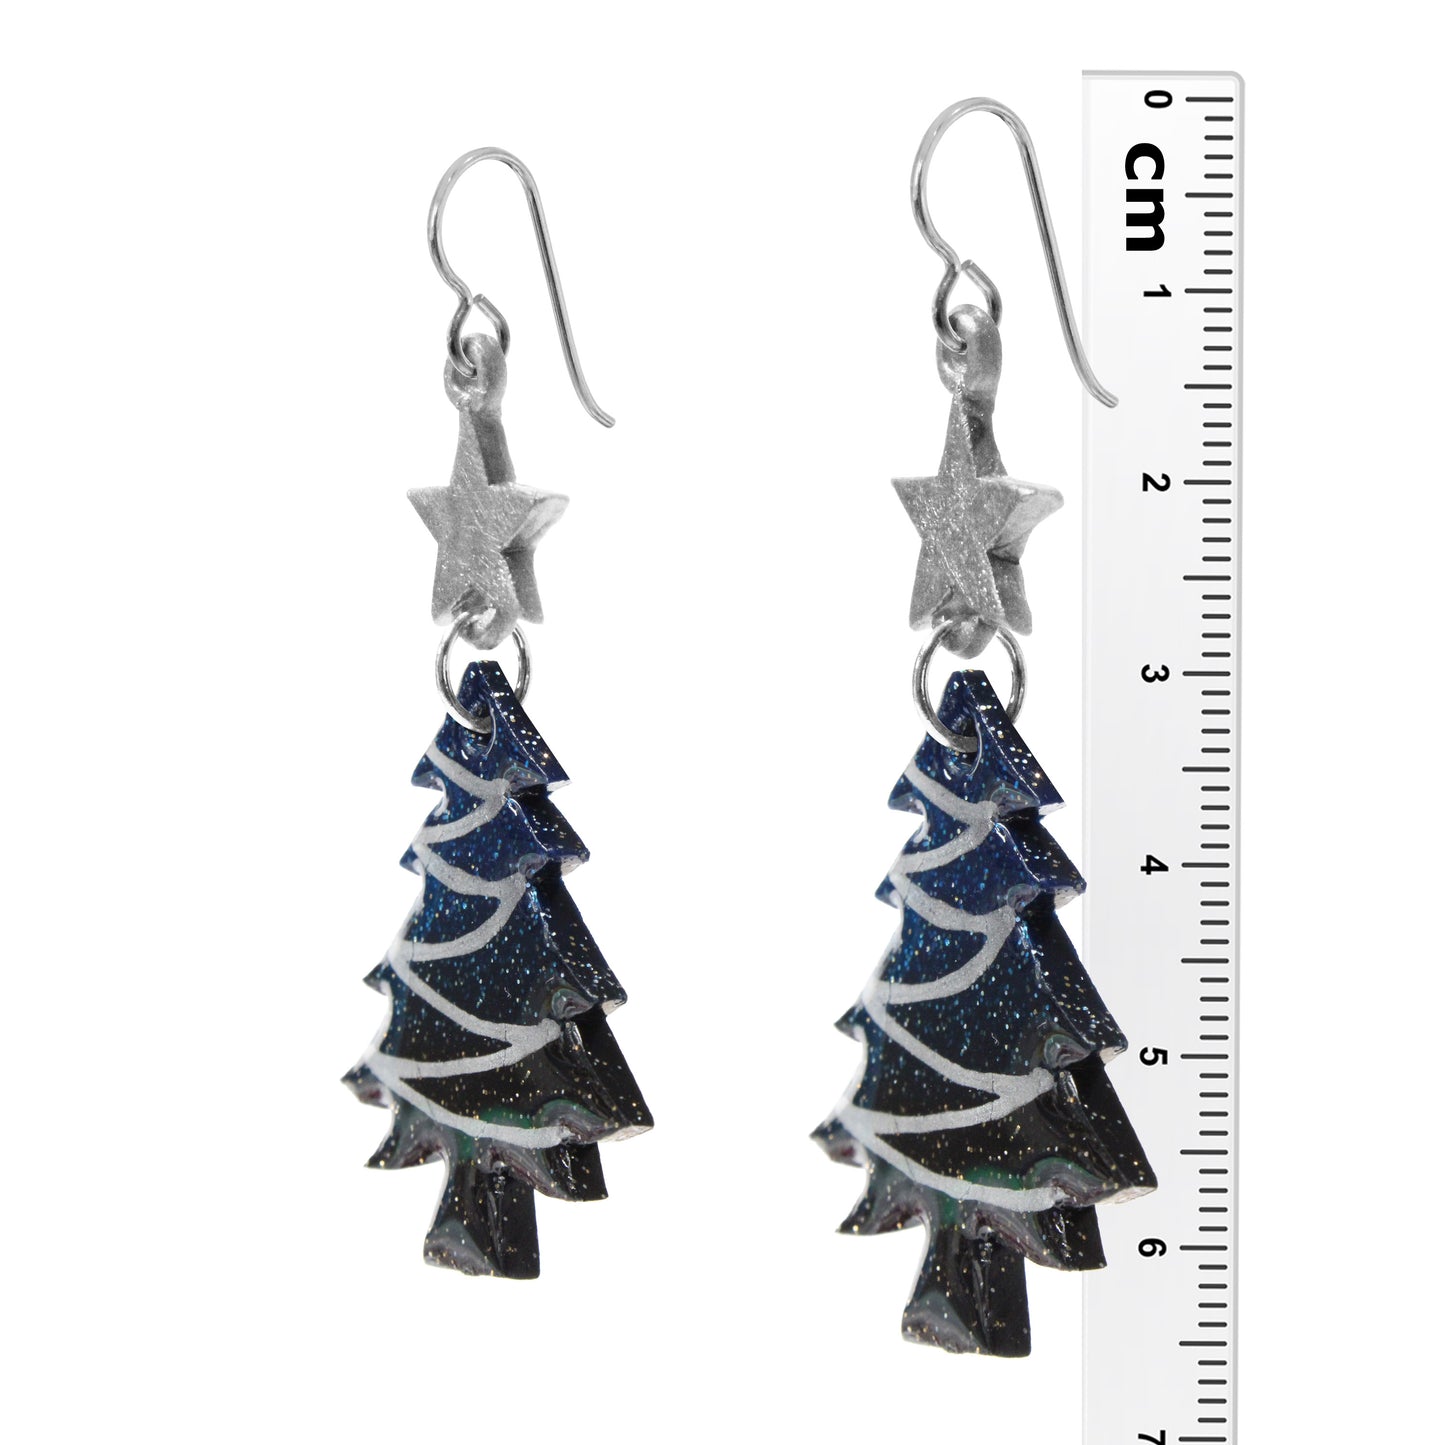 Sparkle Christmas Tree Earrings / 65mm length / sterling silver earwires